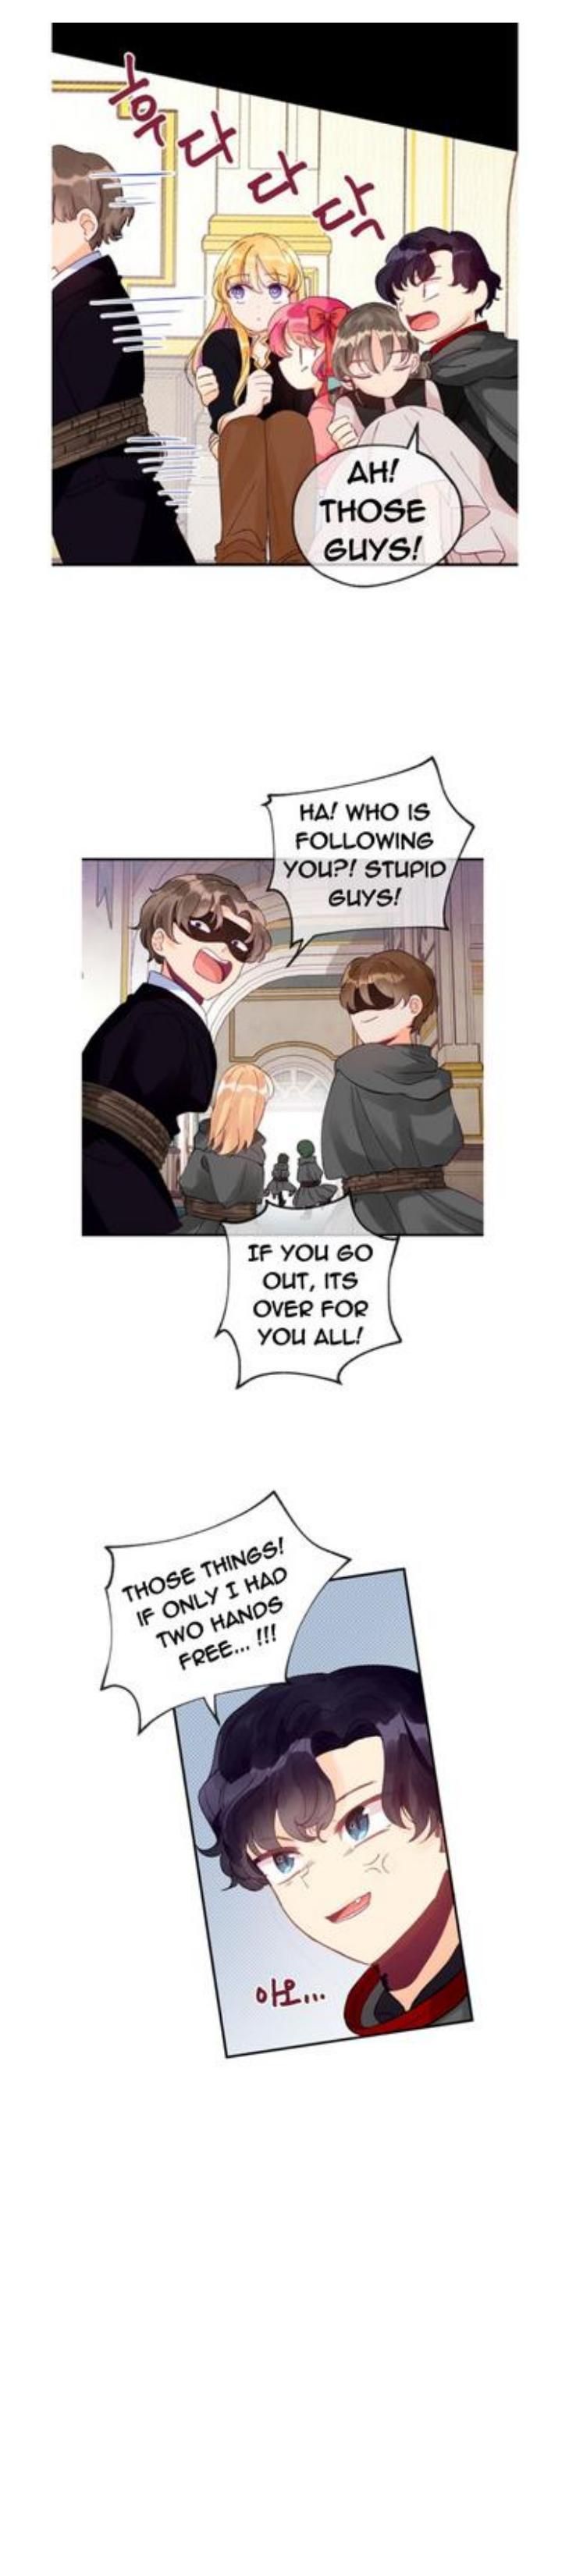 The Secret of the Friendly Duke Chapter 12 page 9